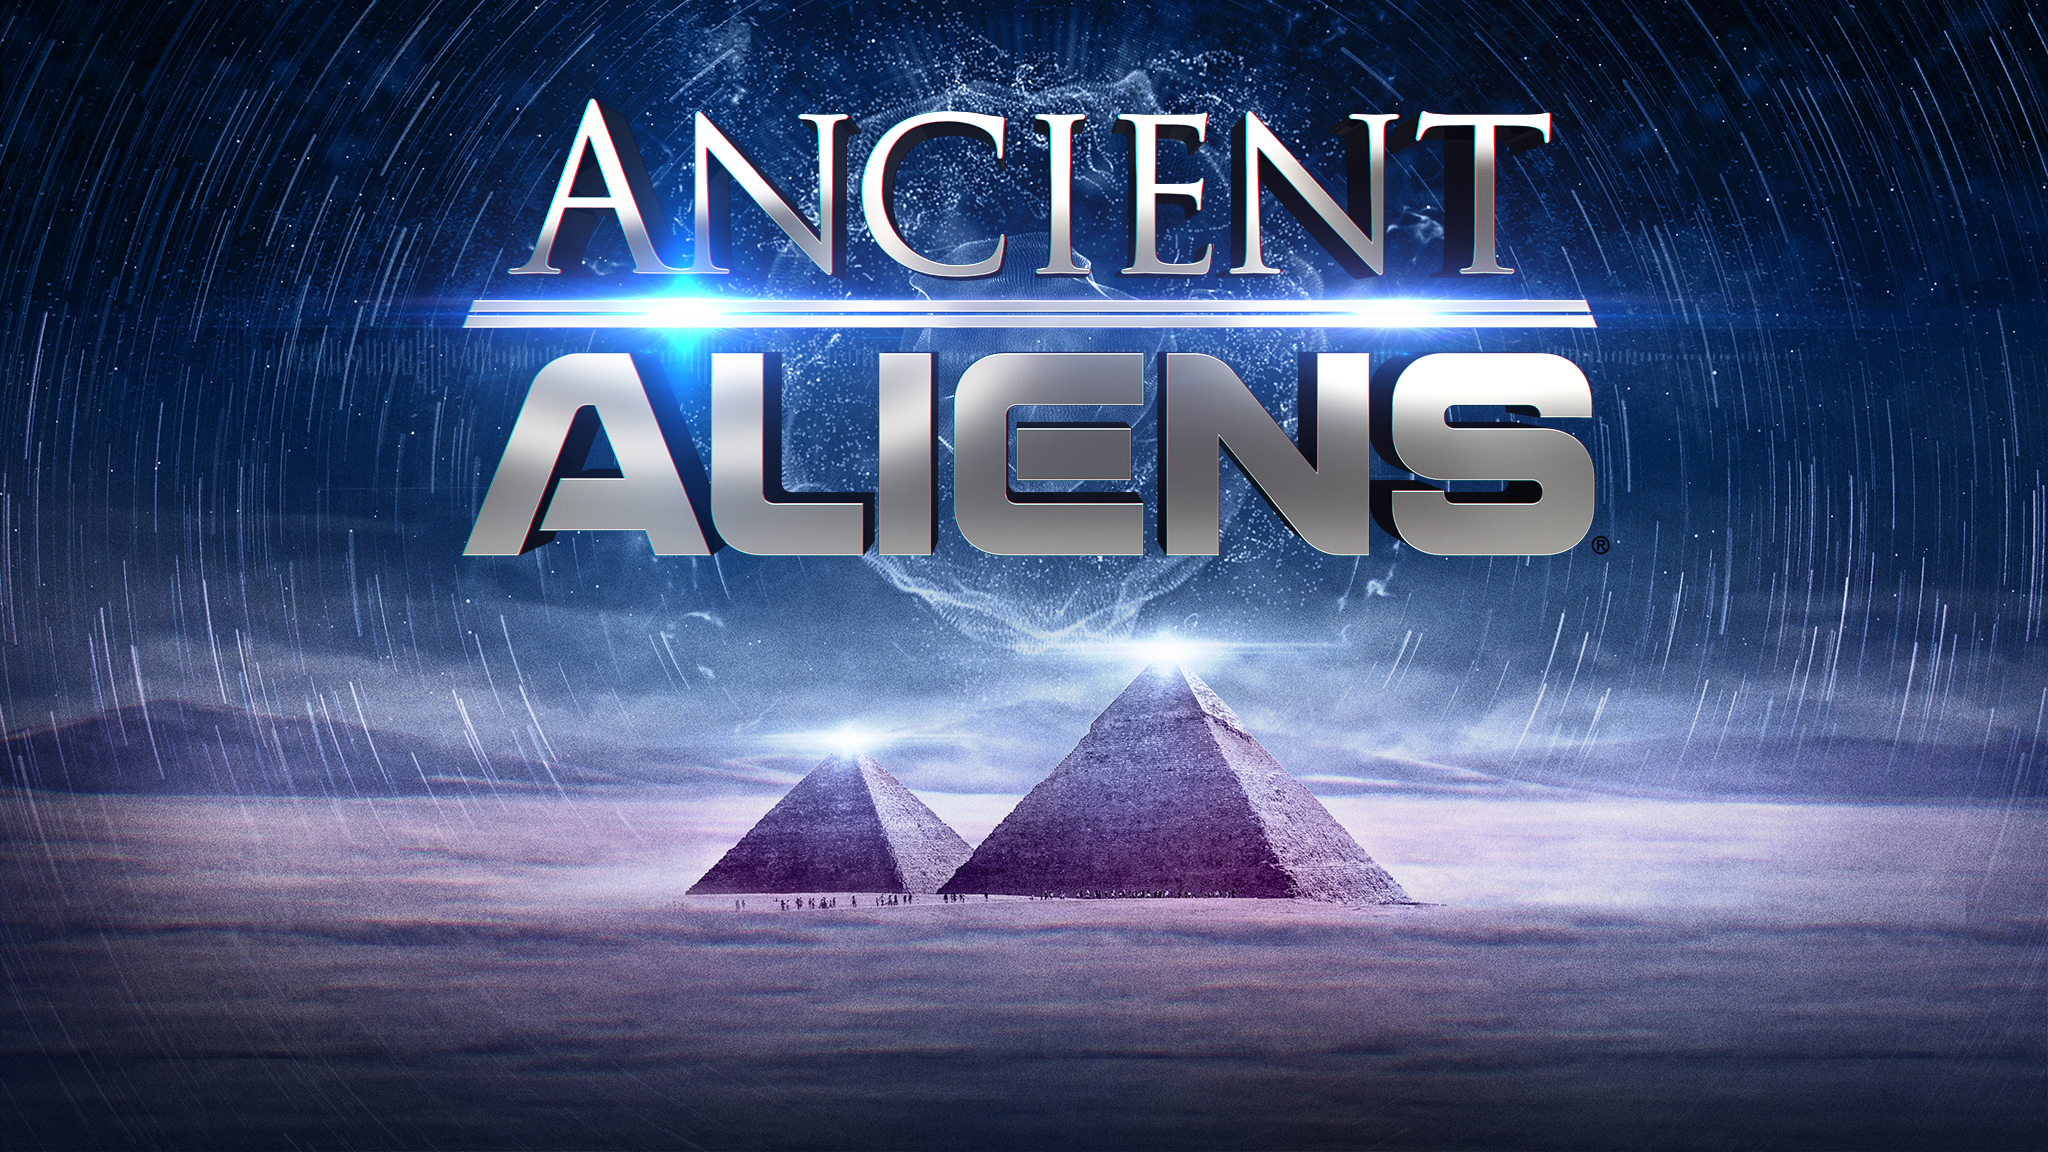 Ancient aliens all seasons download torrent free